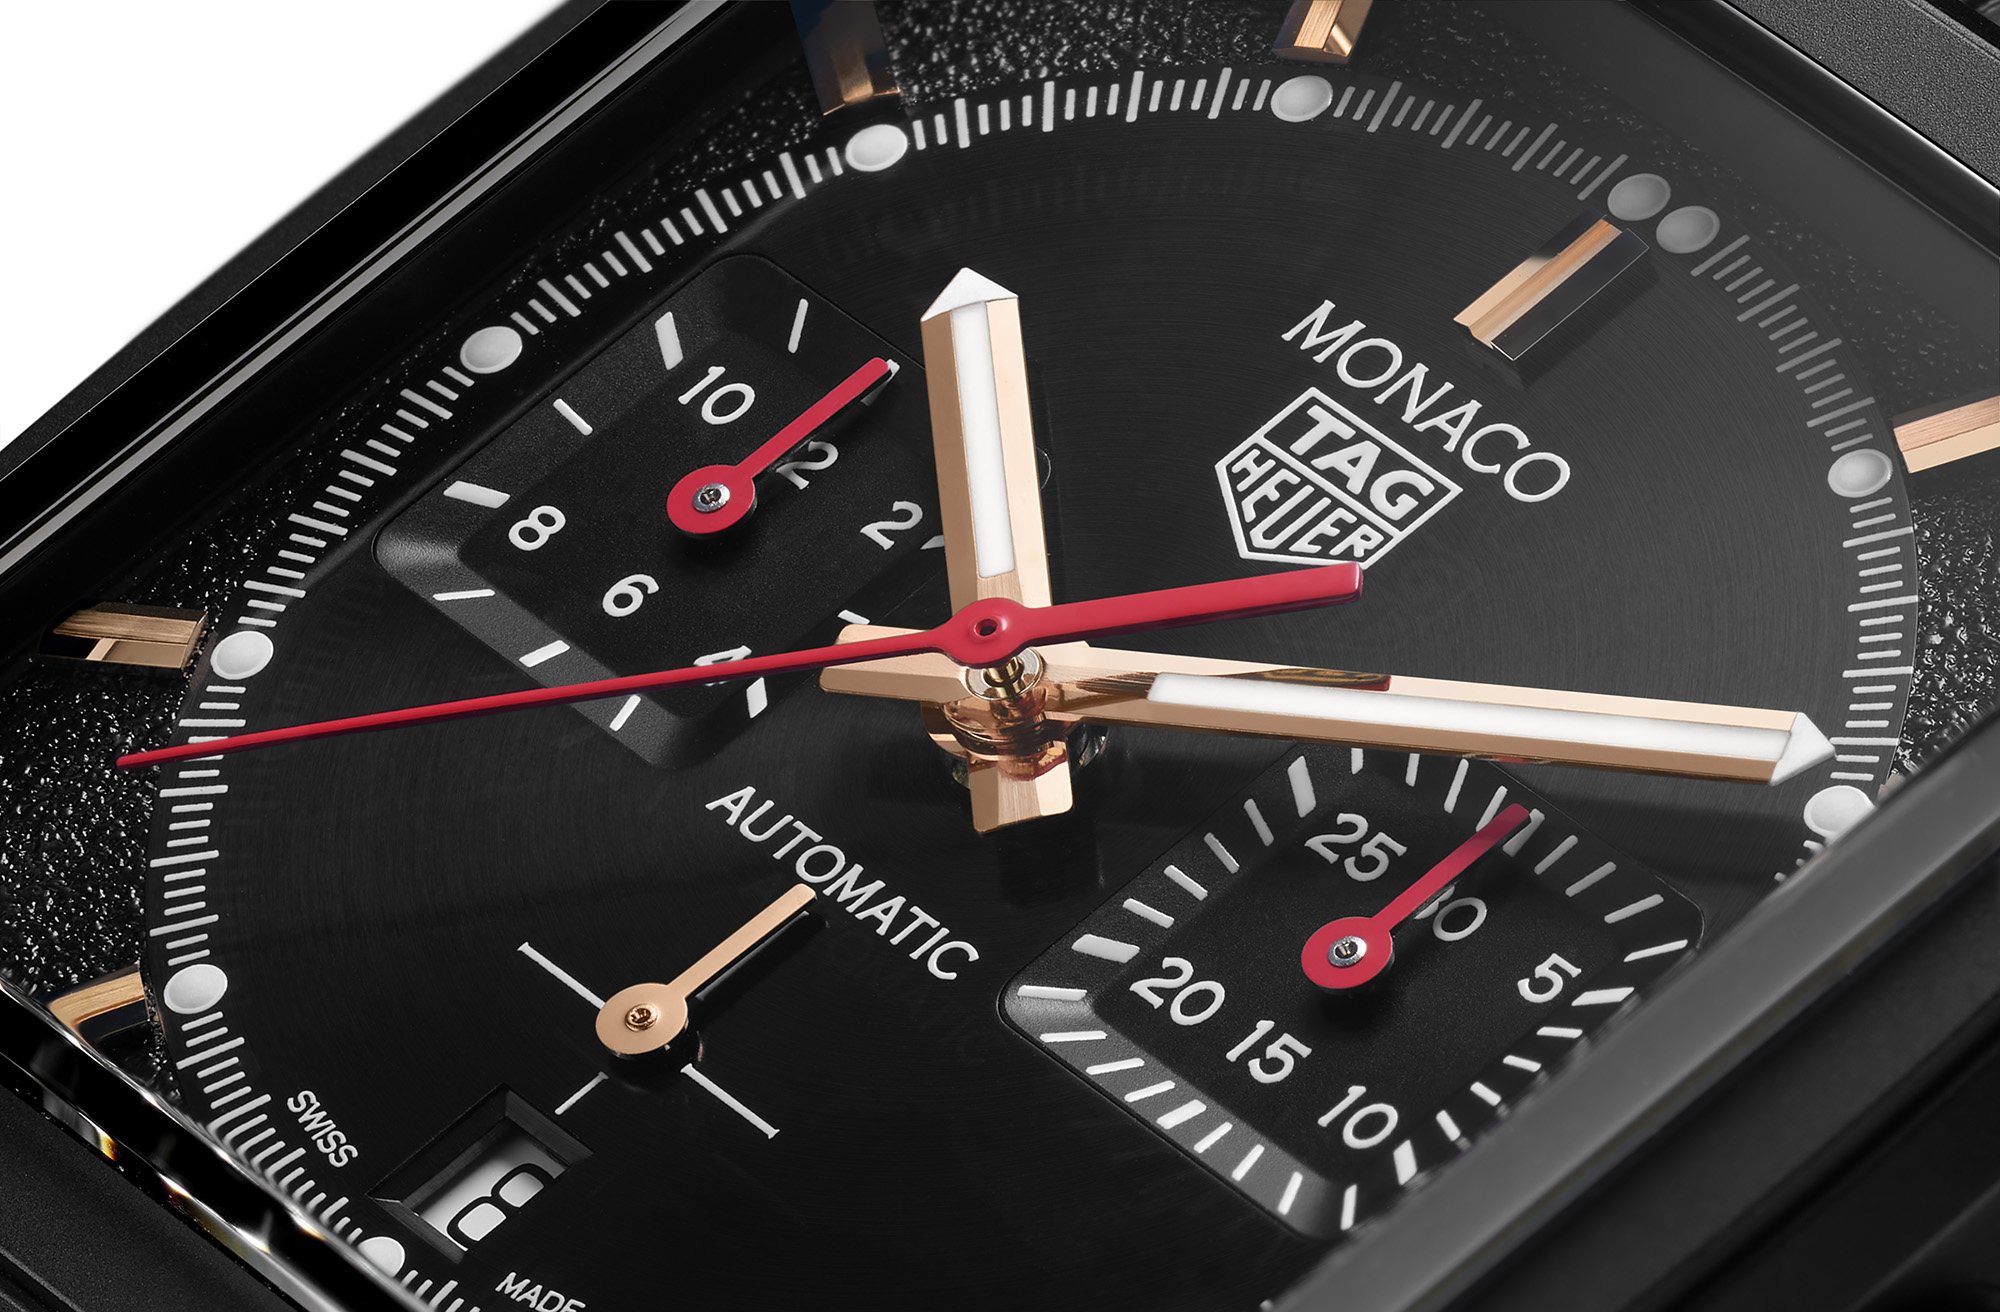 TAG Heuer: Awesome Or Average? Why TAG Watches Are Divisive